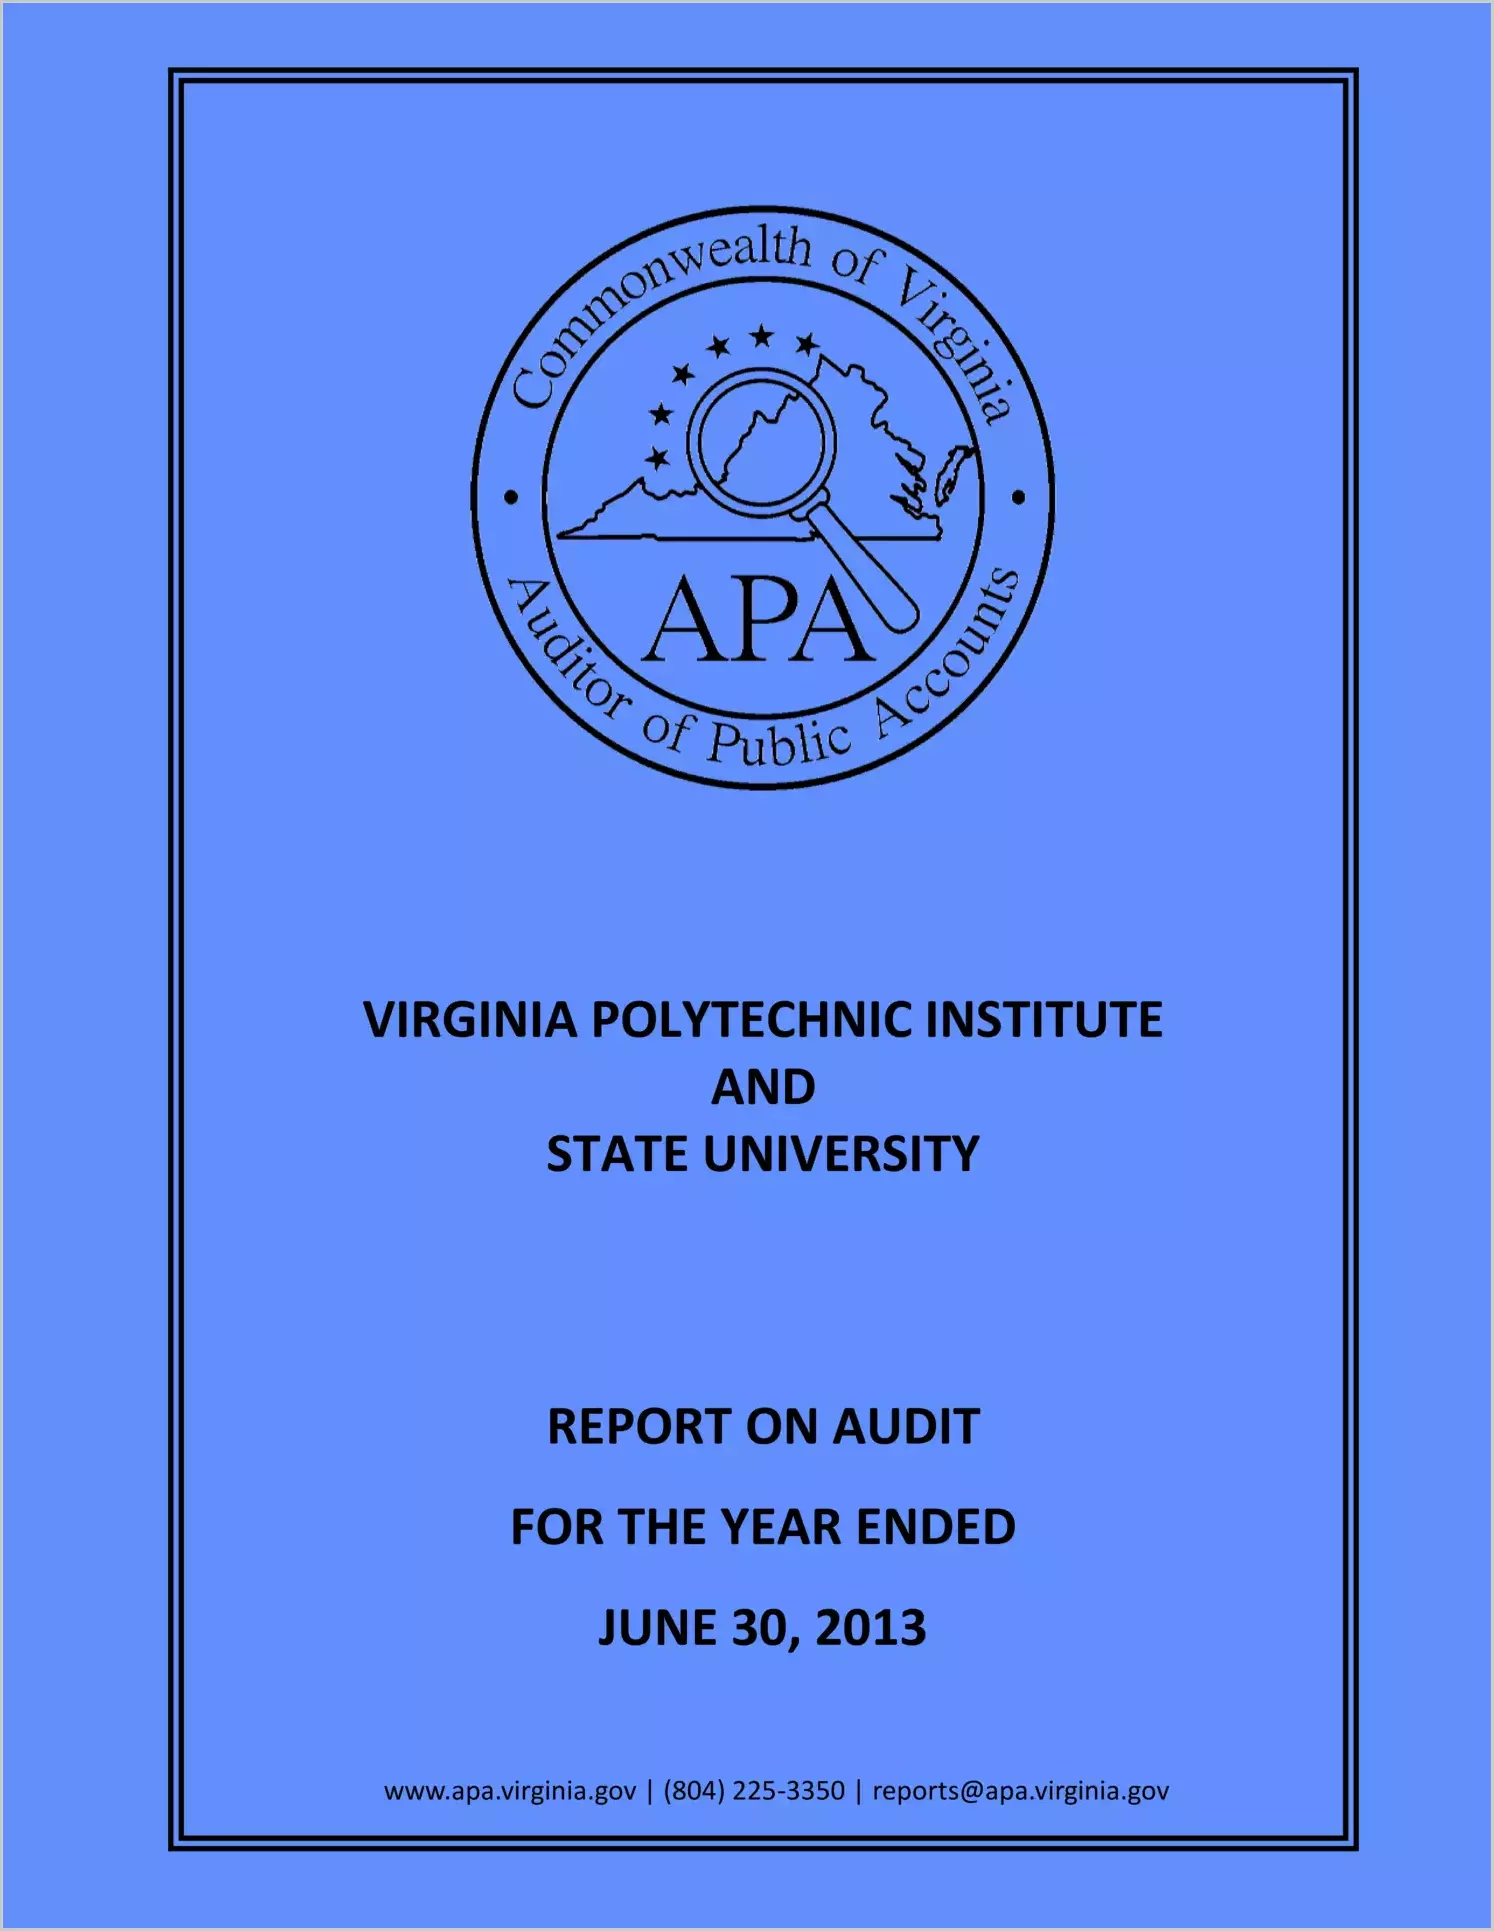 Virginia Polytechnic Institute and State University for the year ended June 30, 2013